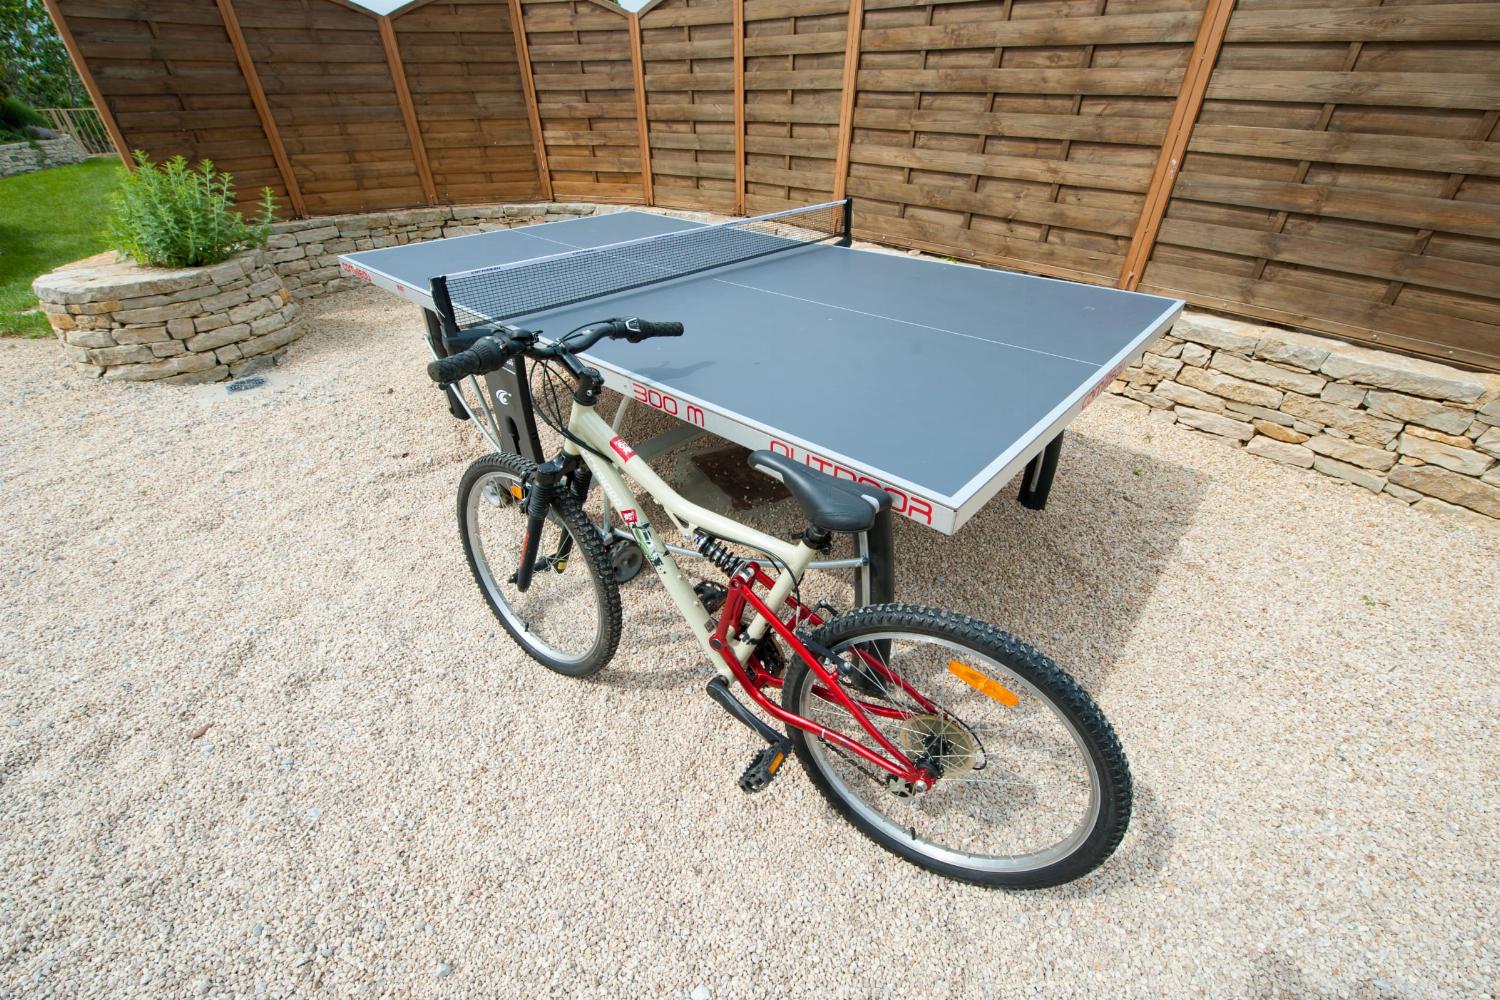 Table tennis and bicycle